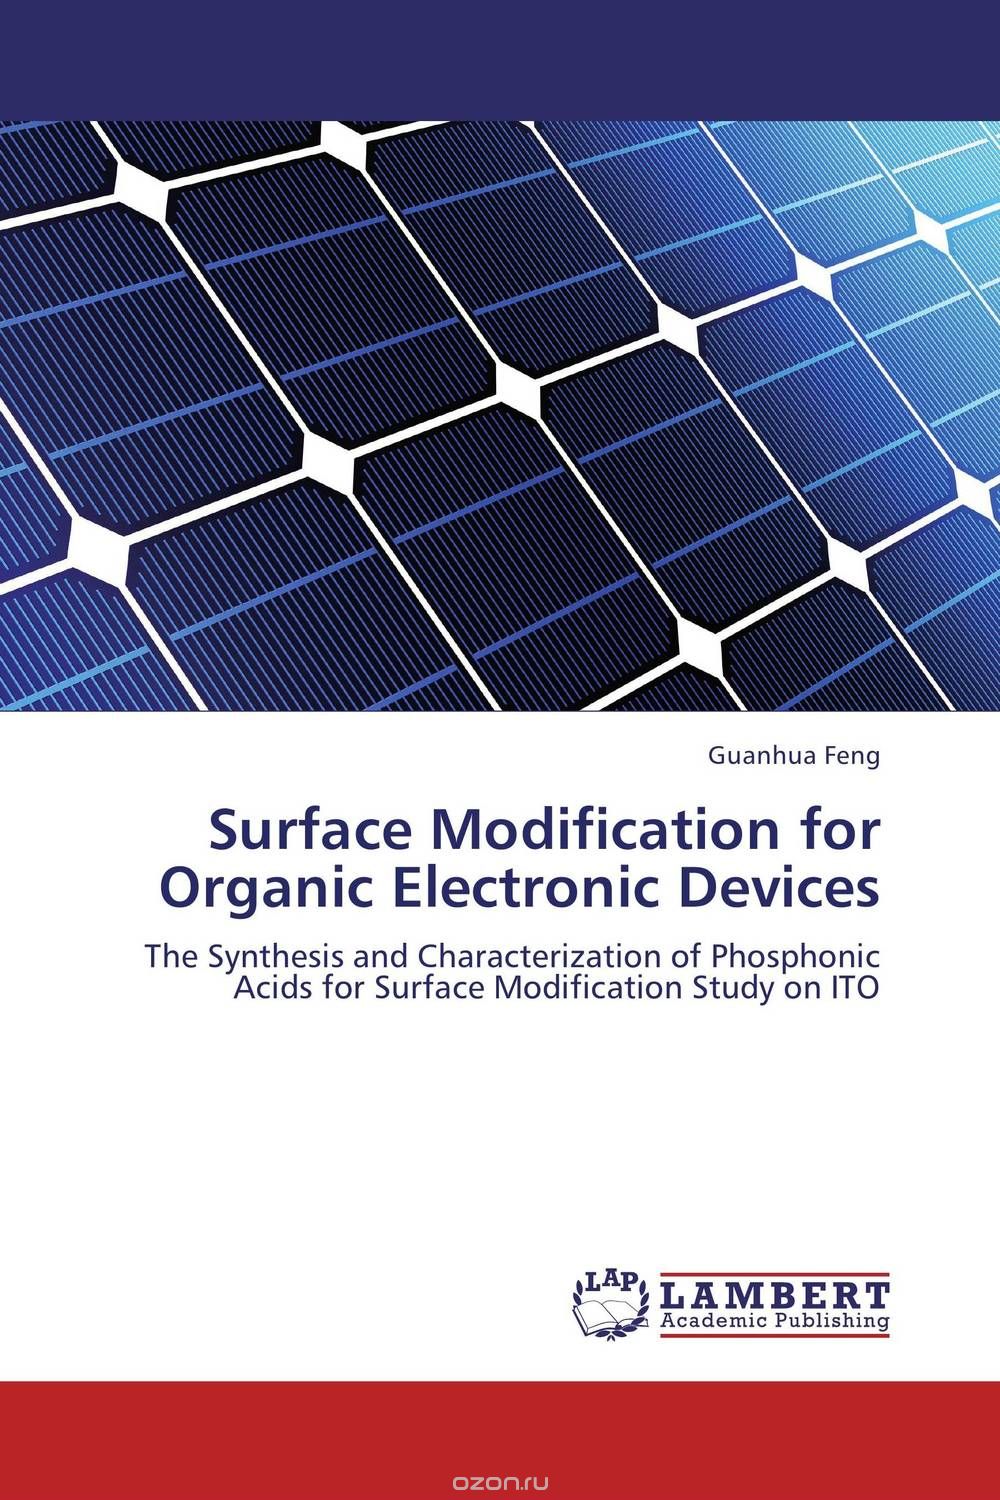 Surface Modification for Organic Electronic Devices